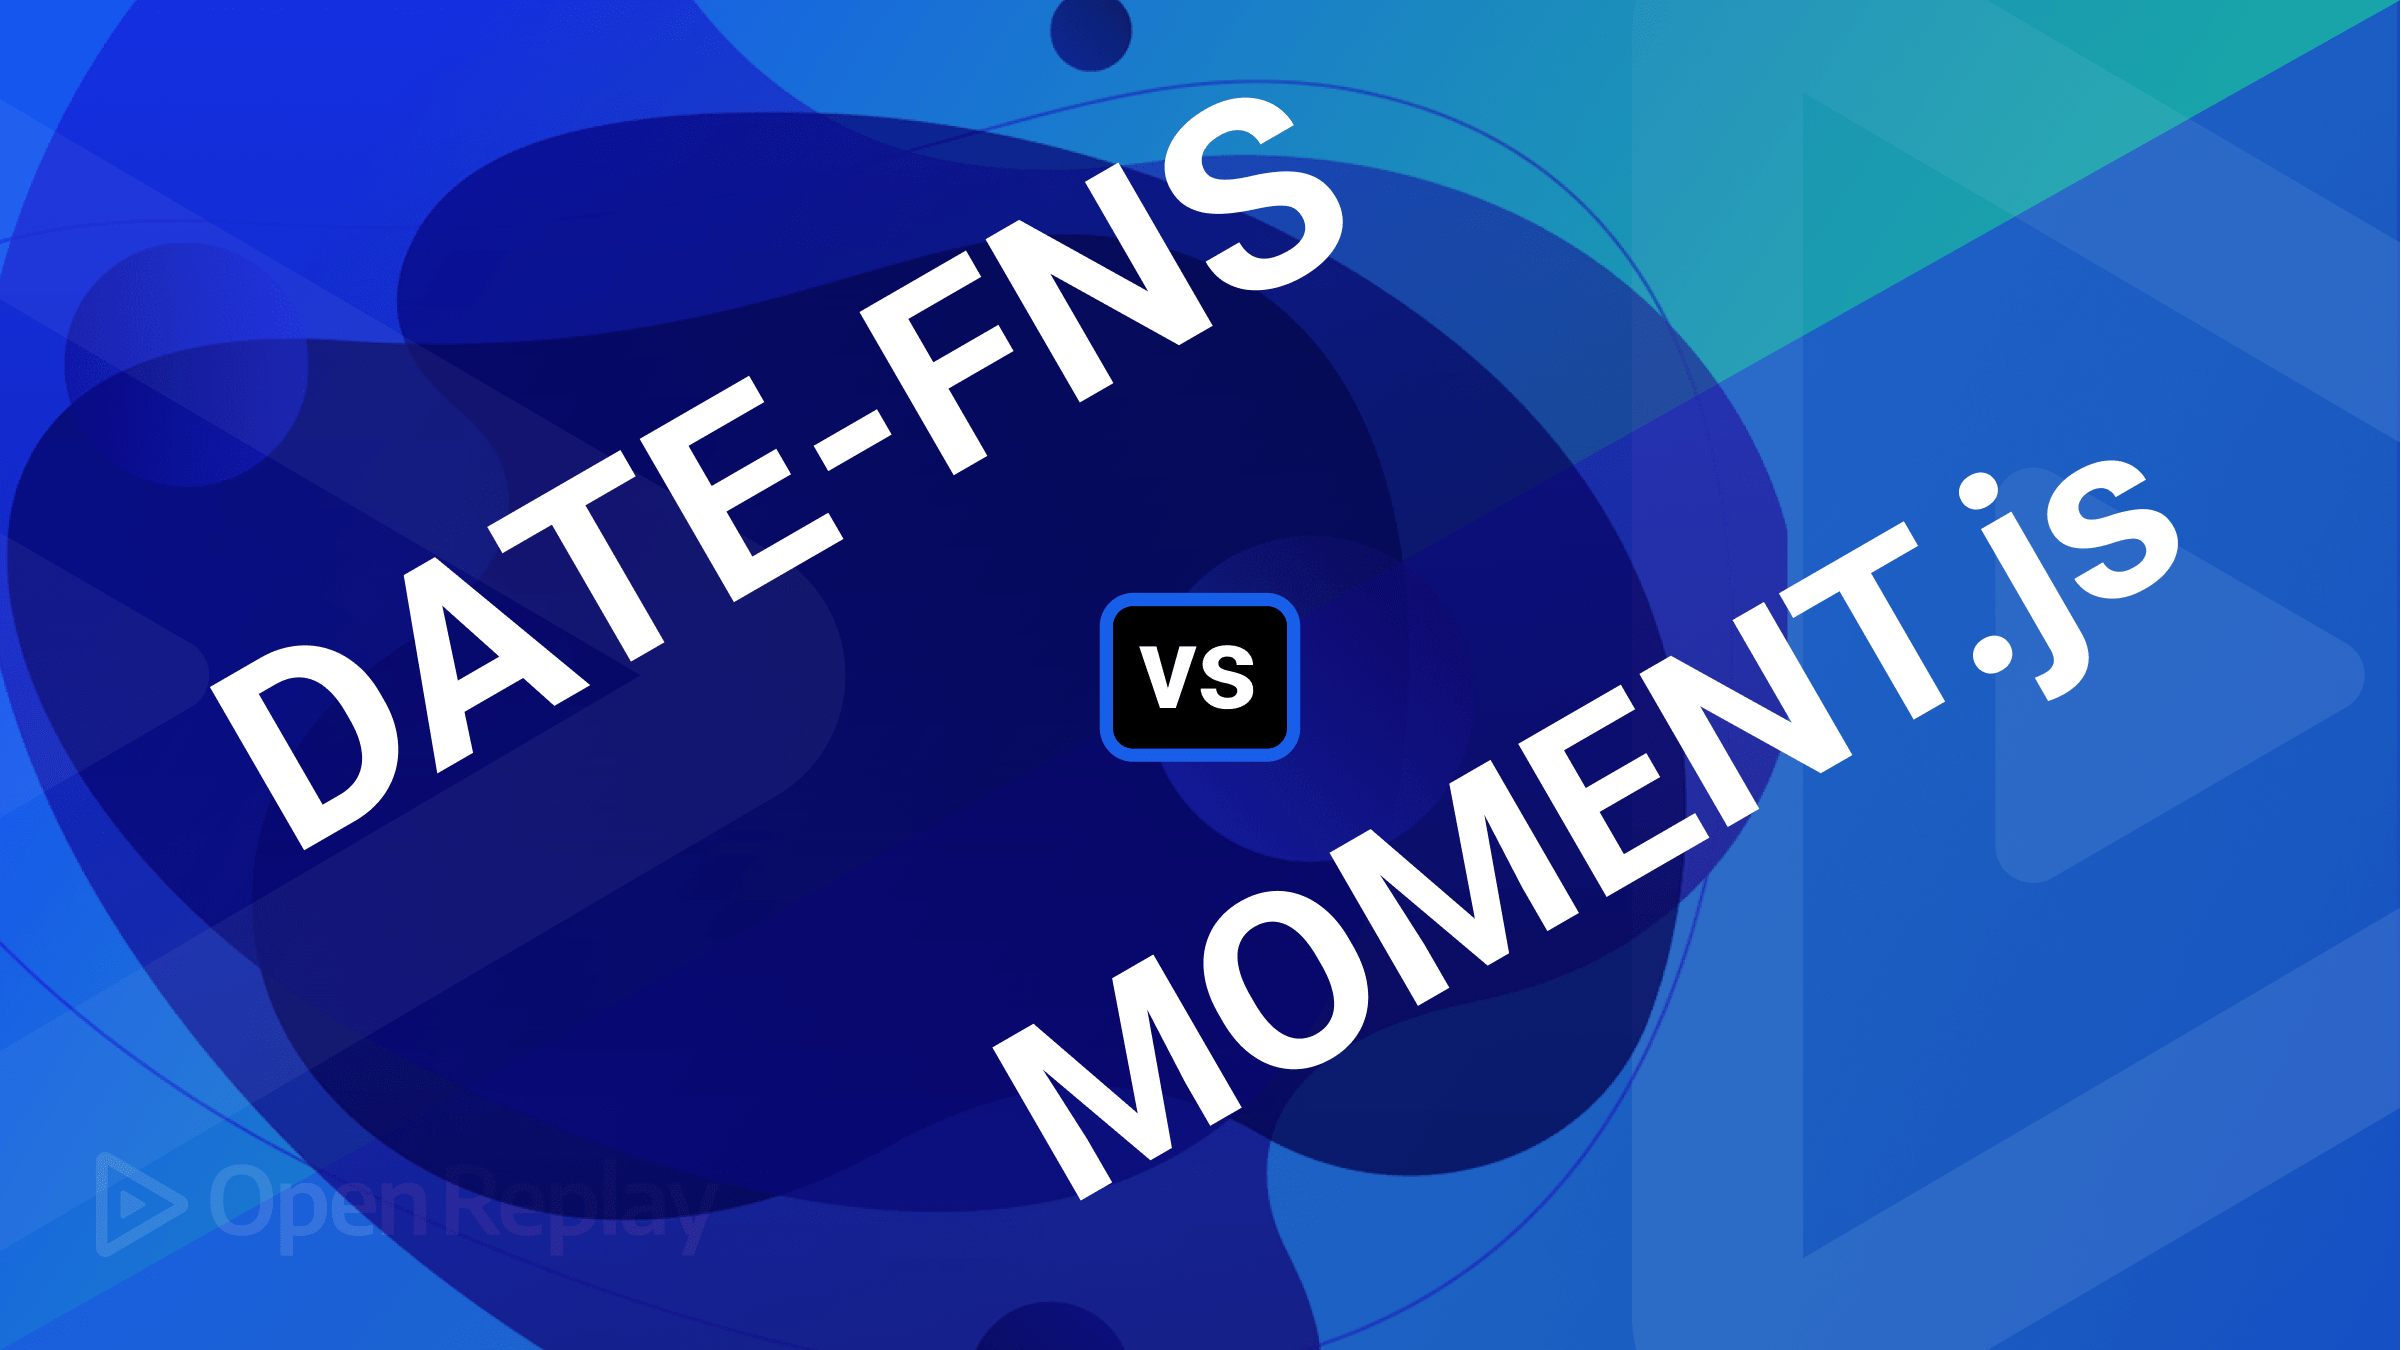 What is better, Date-fns or moment.js?